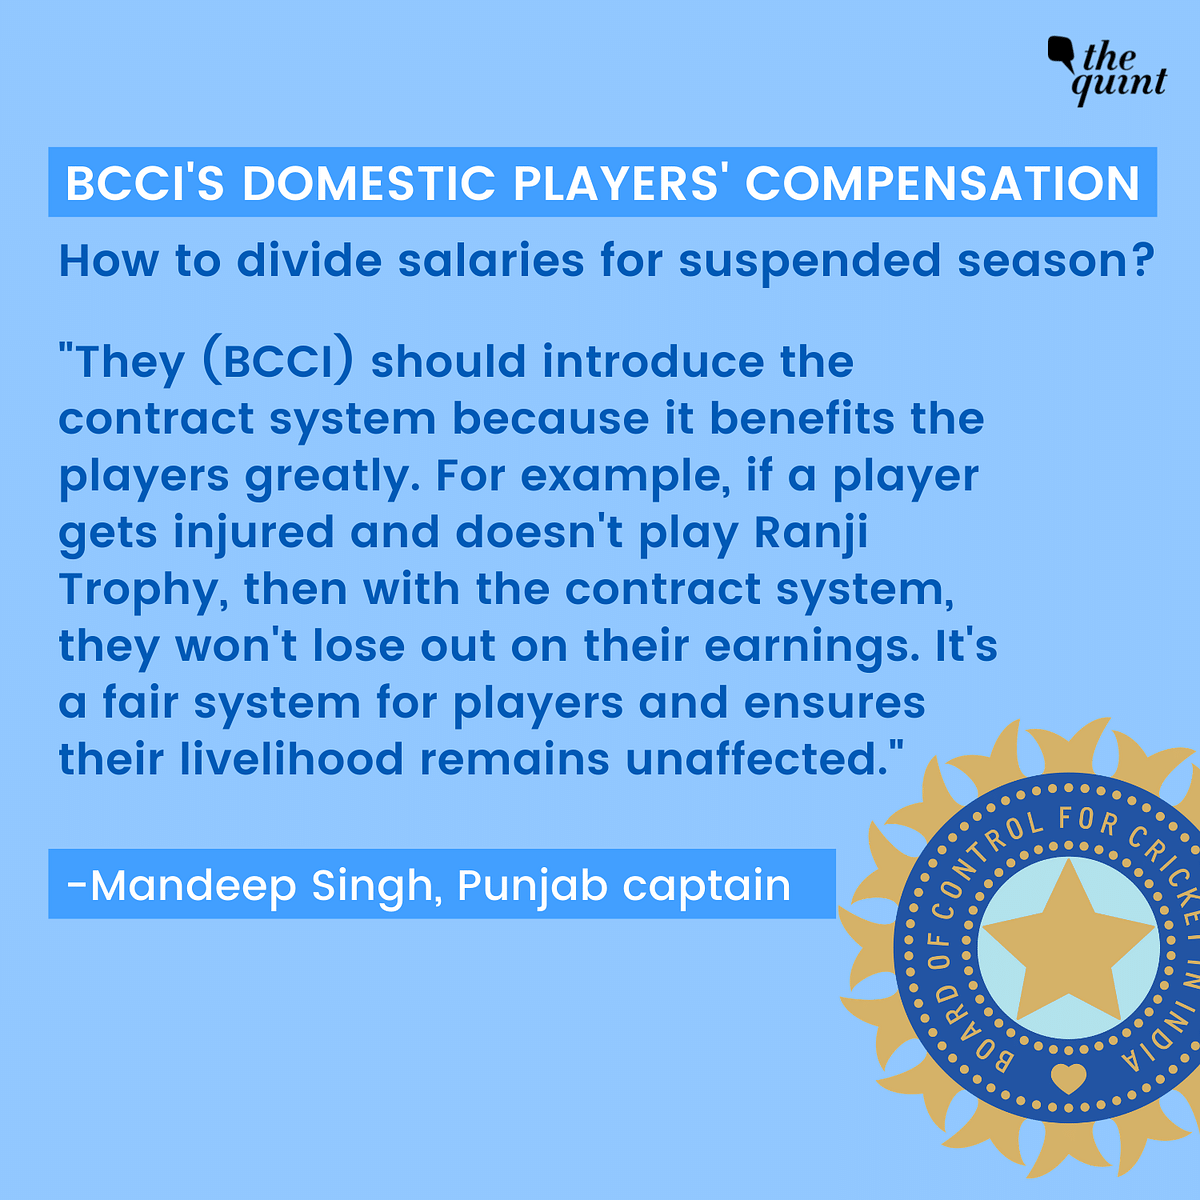 BCCI has decided to compensate players for the cancelled Ranji season in 2020-21, but how will the money be divided?